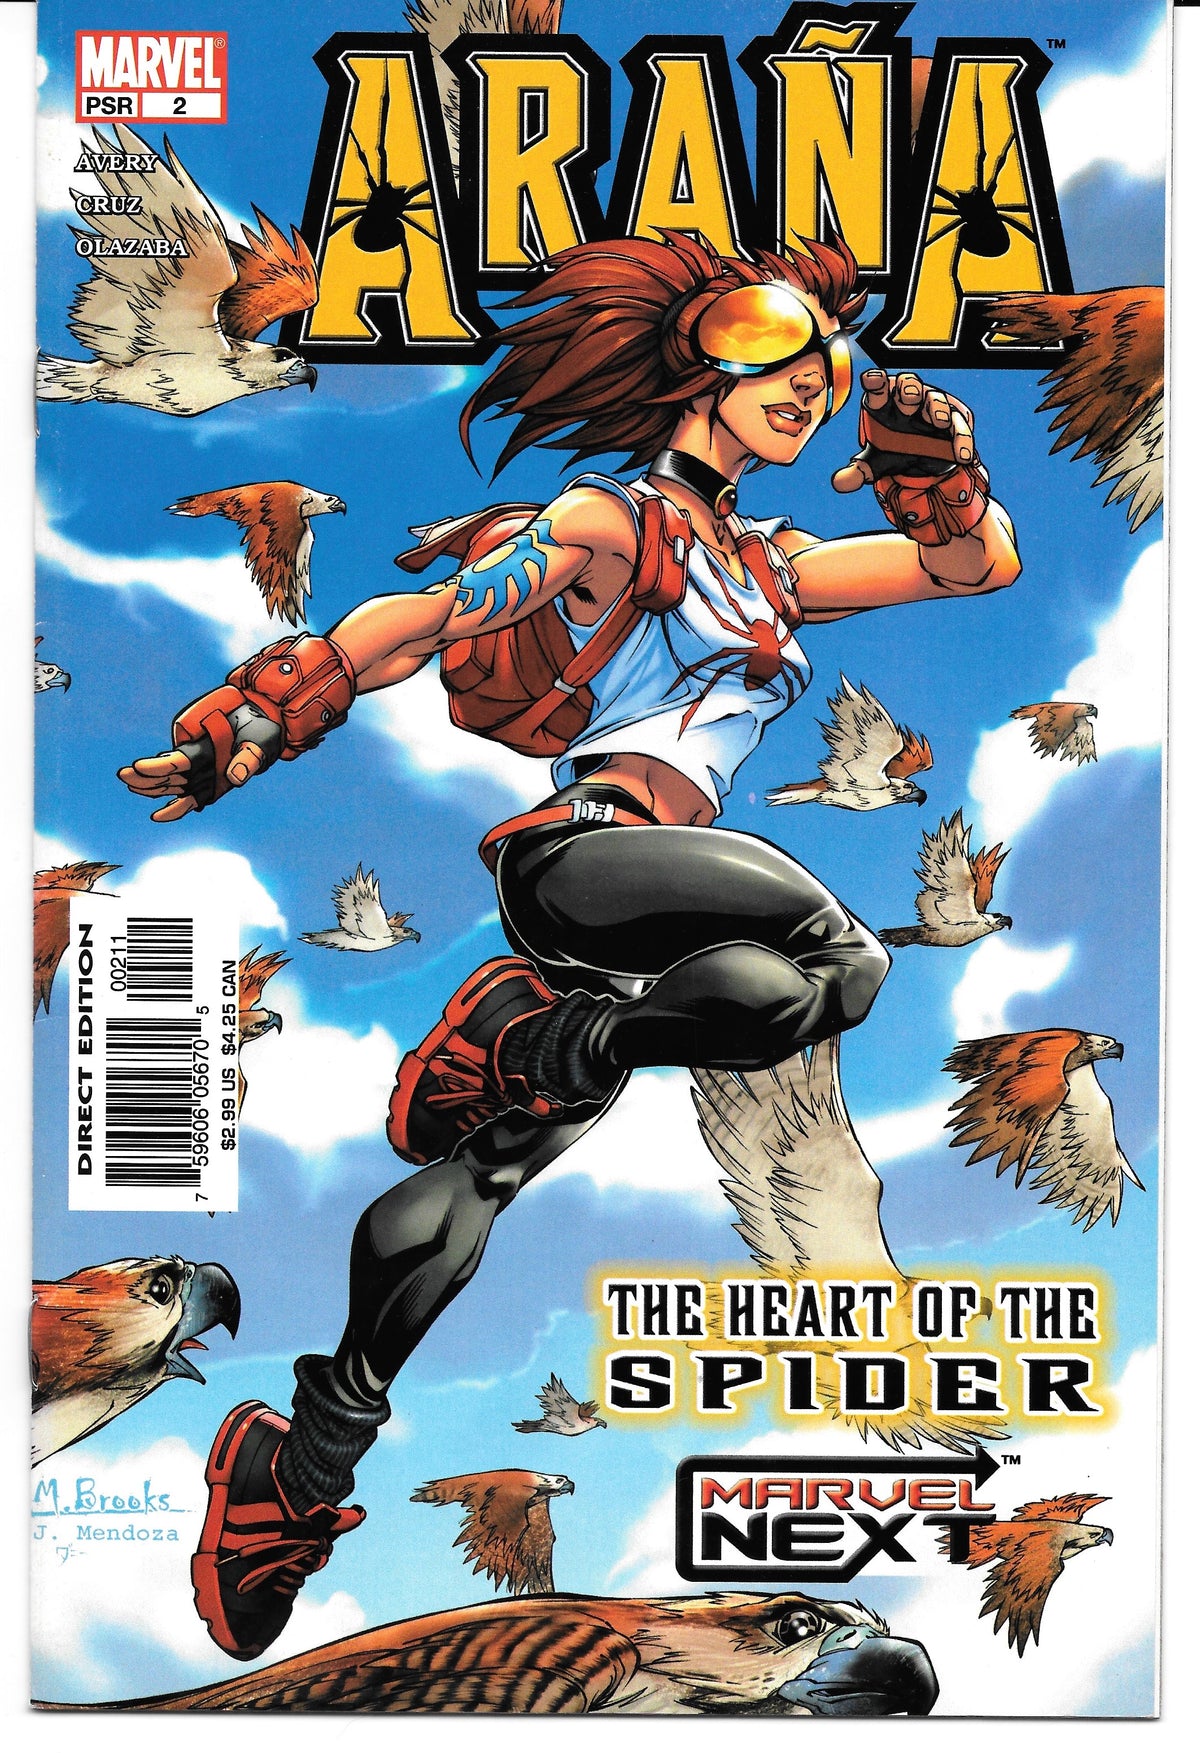 Photo of Arana: The Heart of the Spider (2005) Issue 2 - Fine Comic sold by Stronghold Collectibles